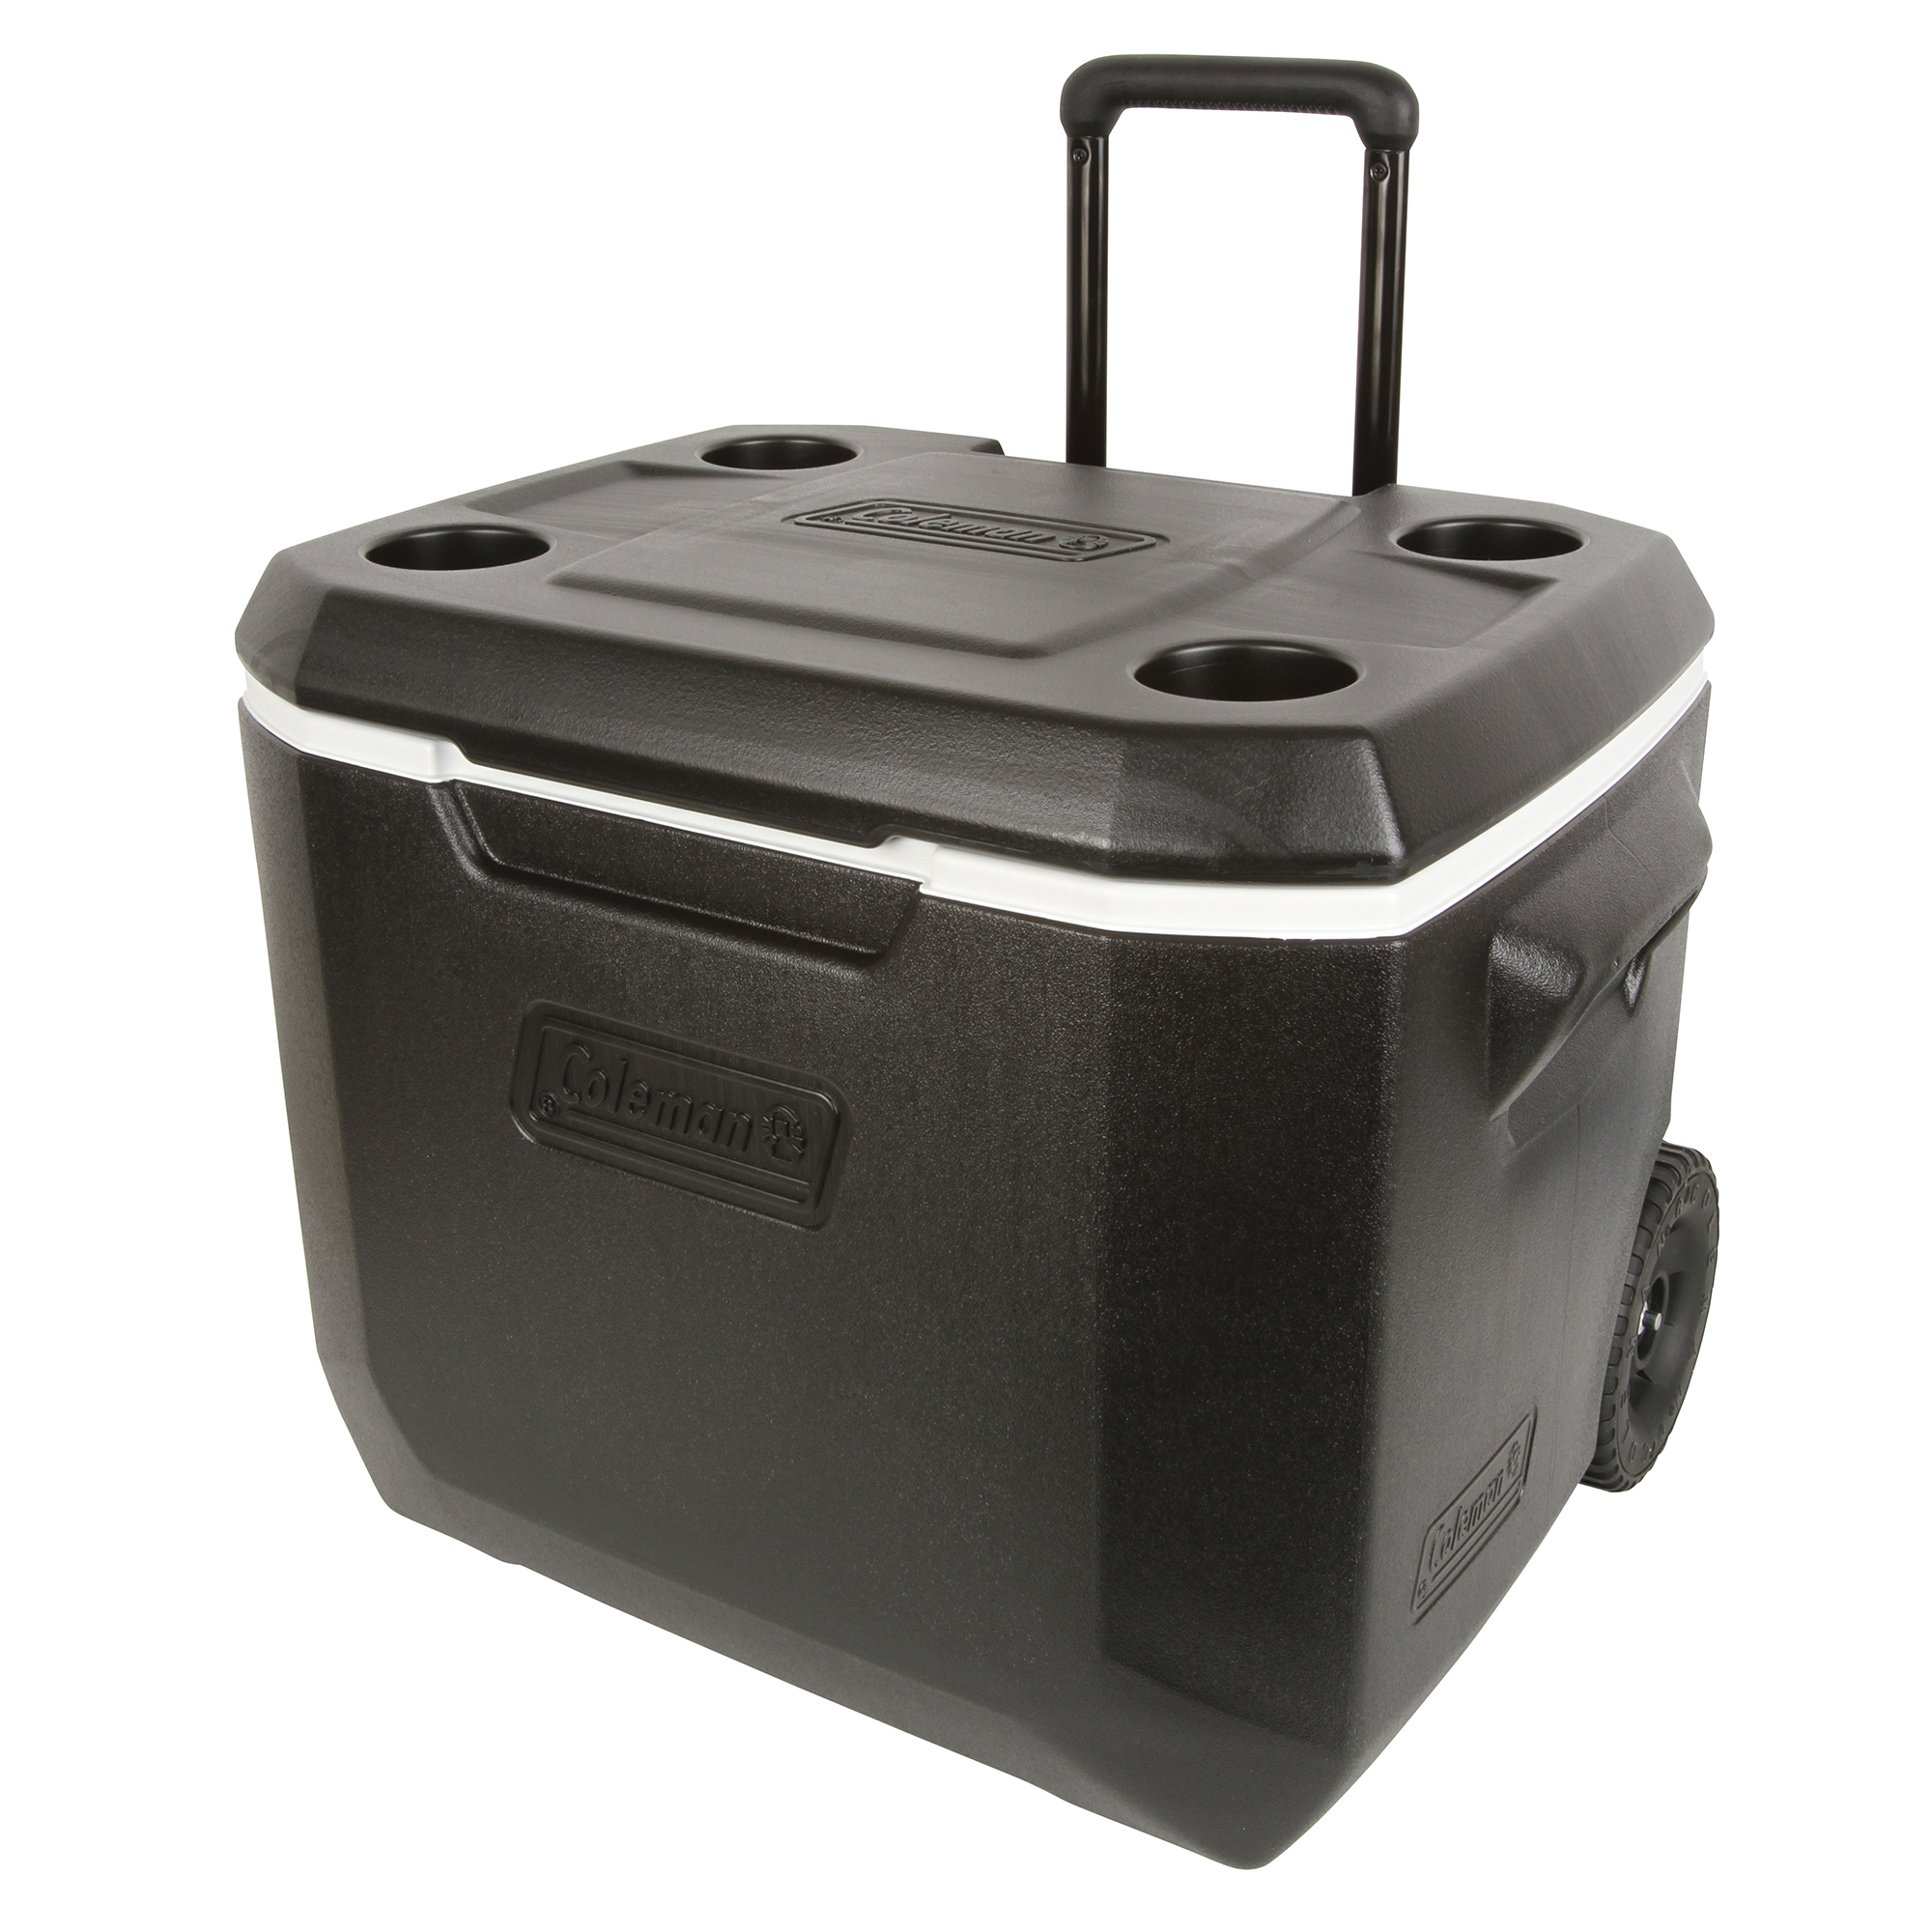 Coleman 50-Quart Xtreme 5-Day Heavy-Duty Hard Cooler with Wheels, Black - image 3 of 3